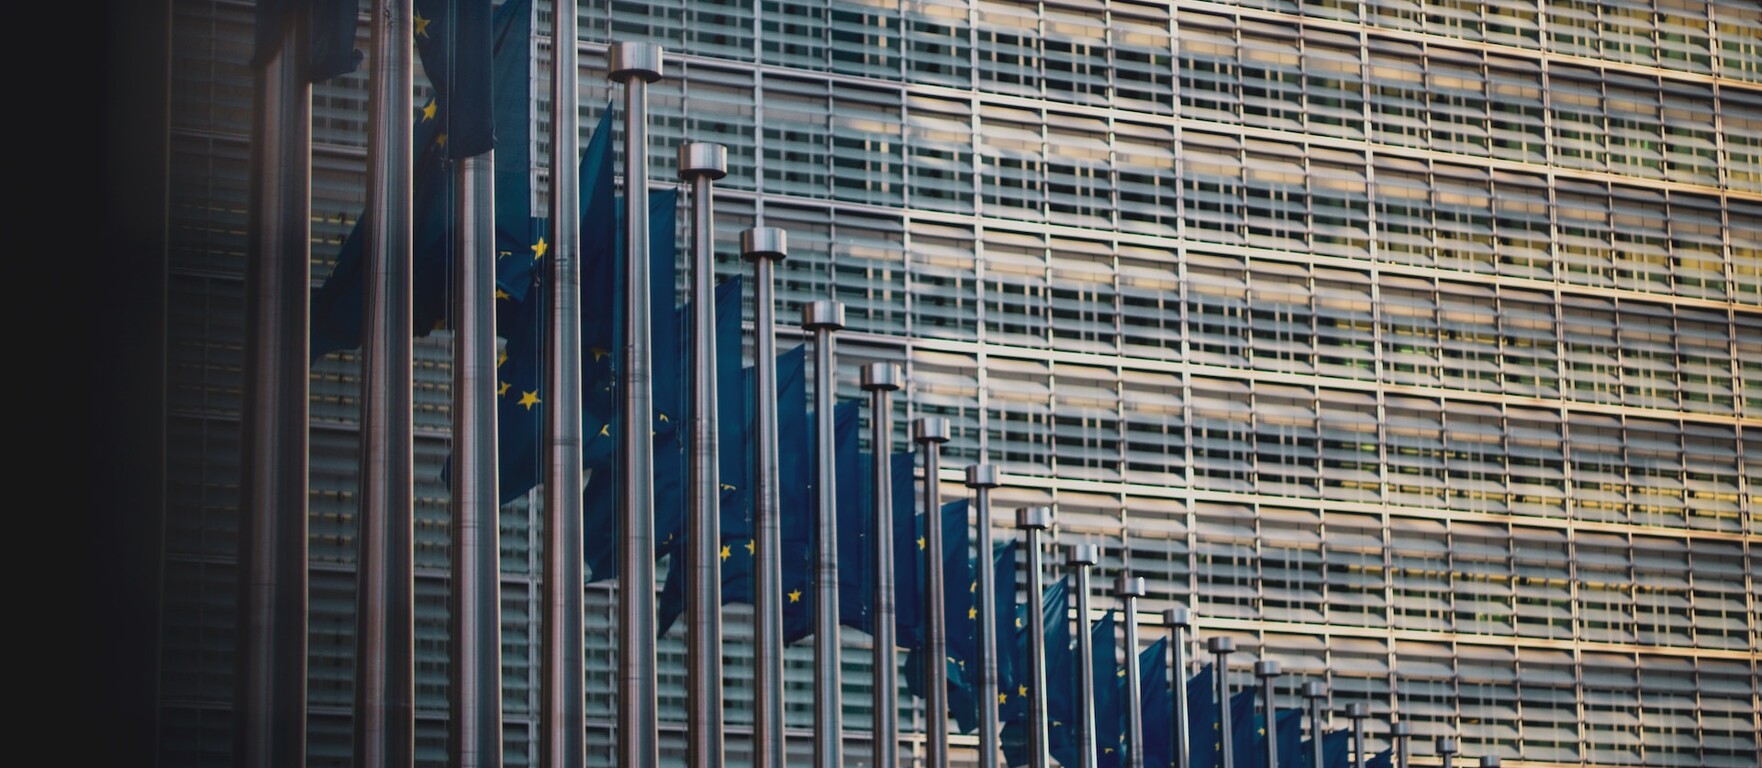 The make-up of the European Commission is changing fast – and it has implications for attitudes in Brussels